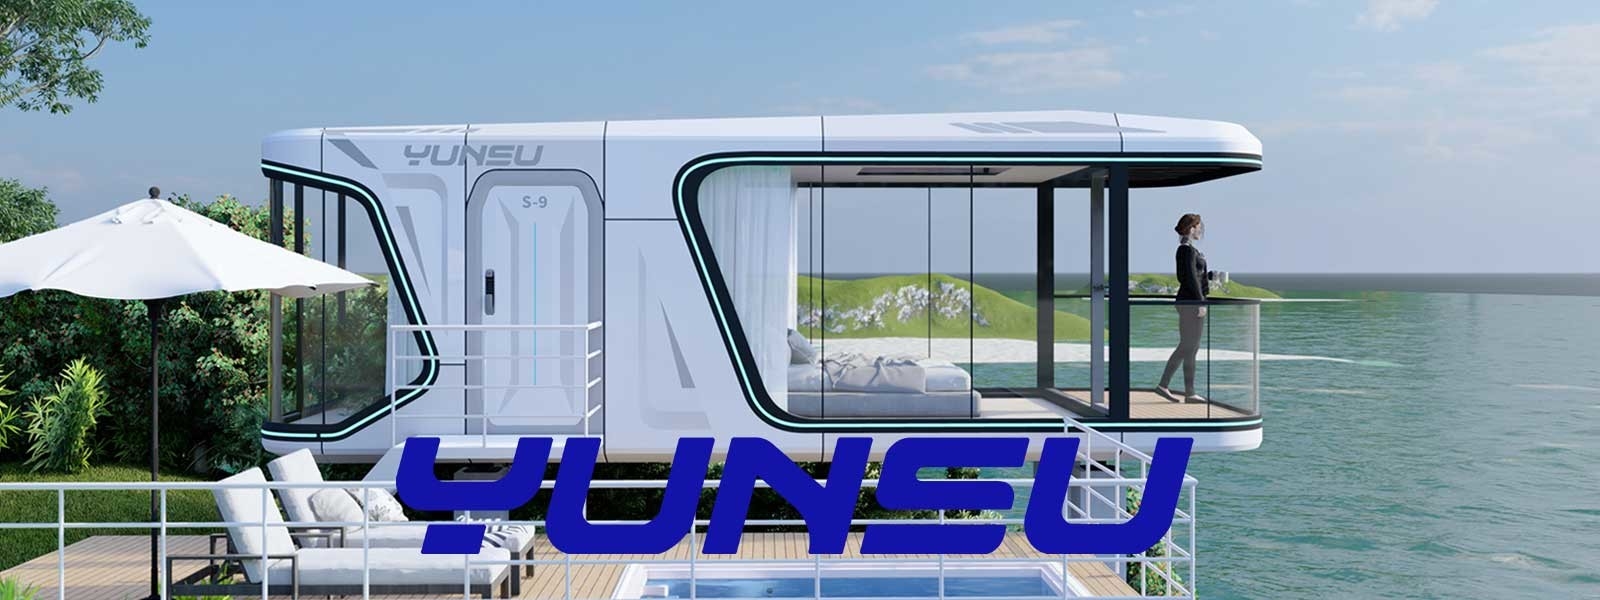 YUNSU S9 Luxury Prefab Tiny Home Mobile Sleeping Homestay Capsule House With Skylight System